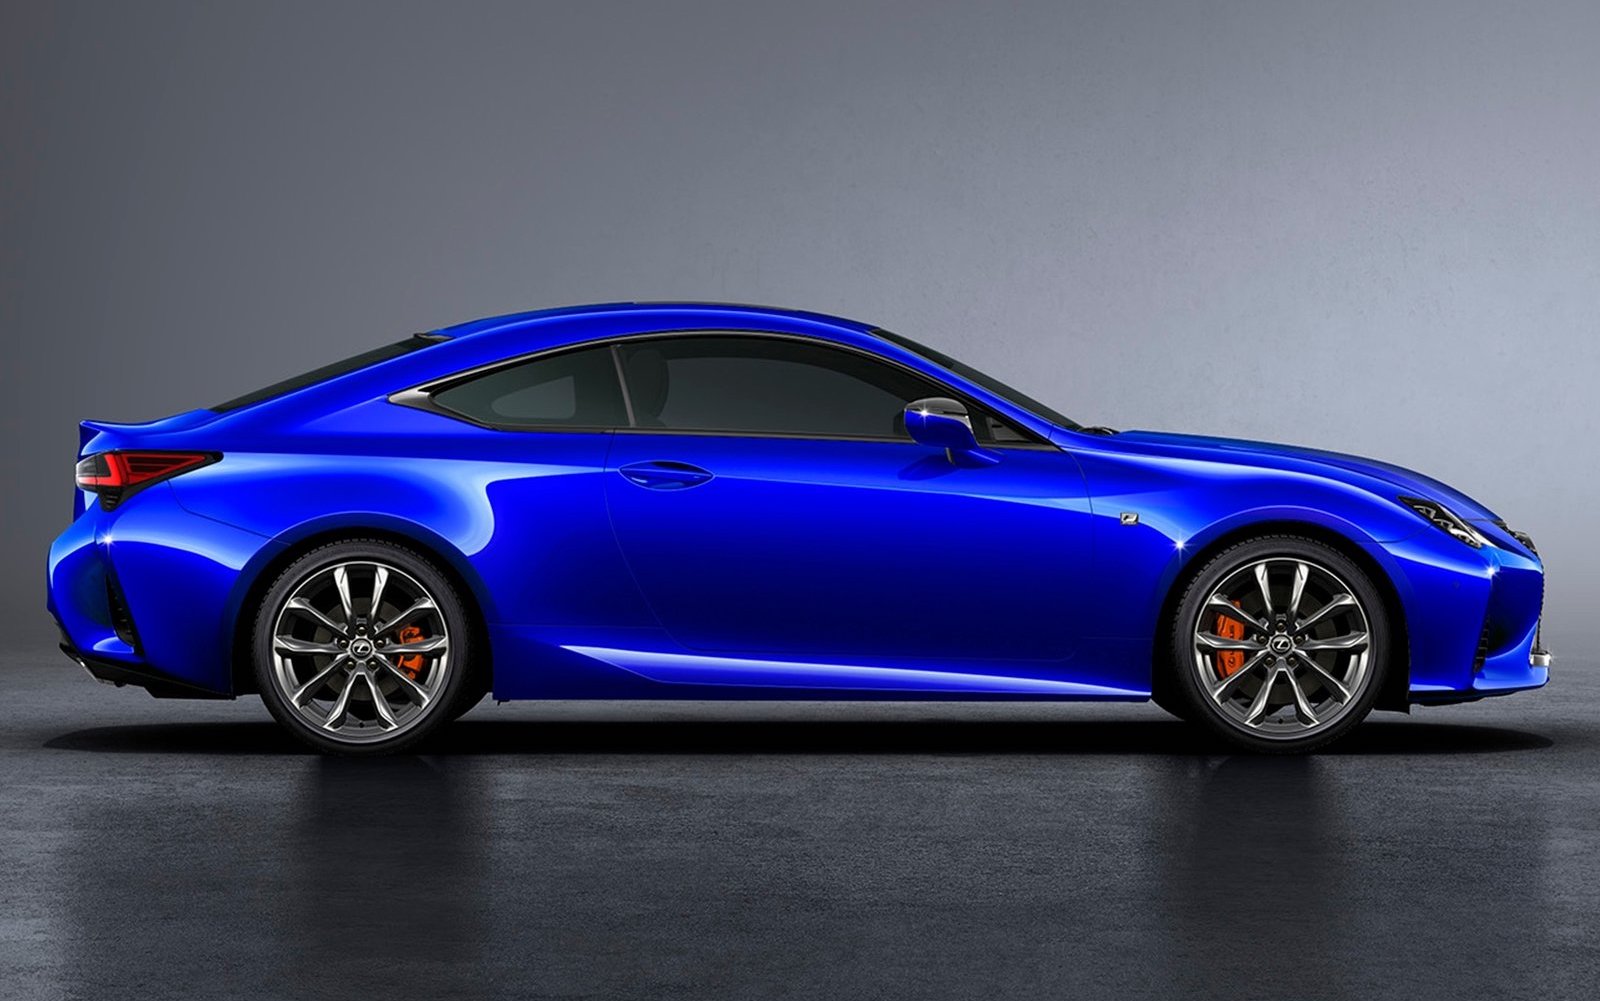 2019 Lexus RC on sale in Australia later this year